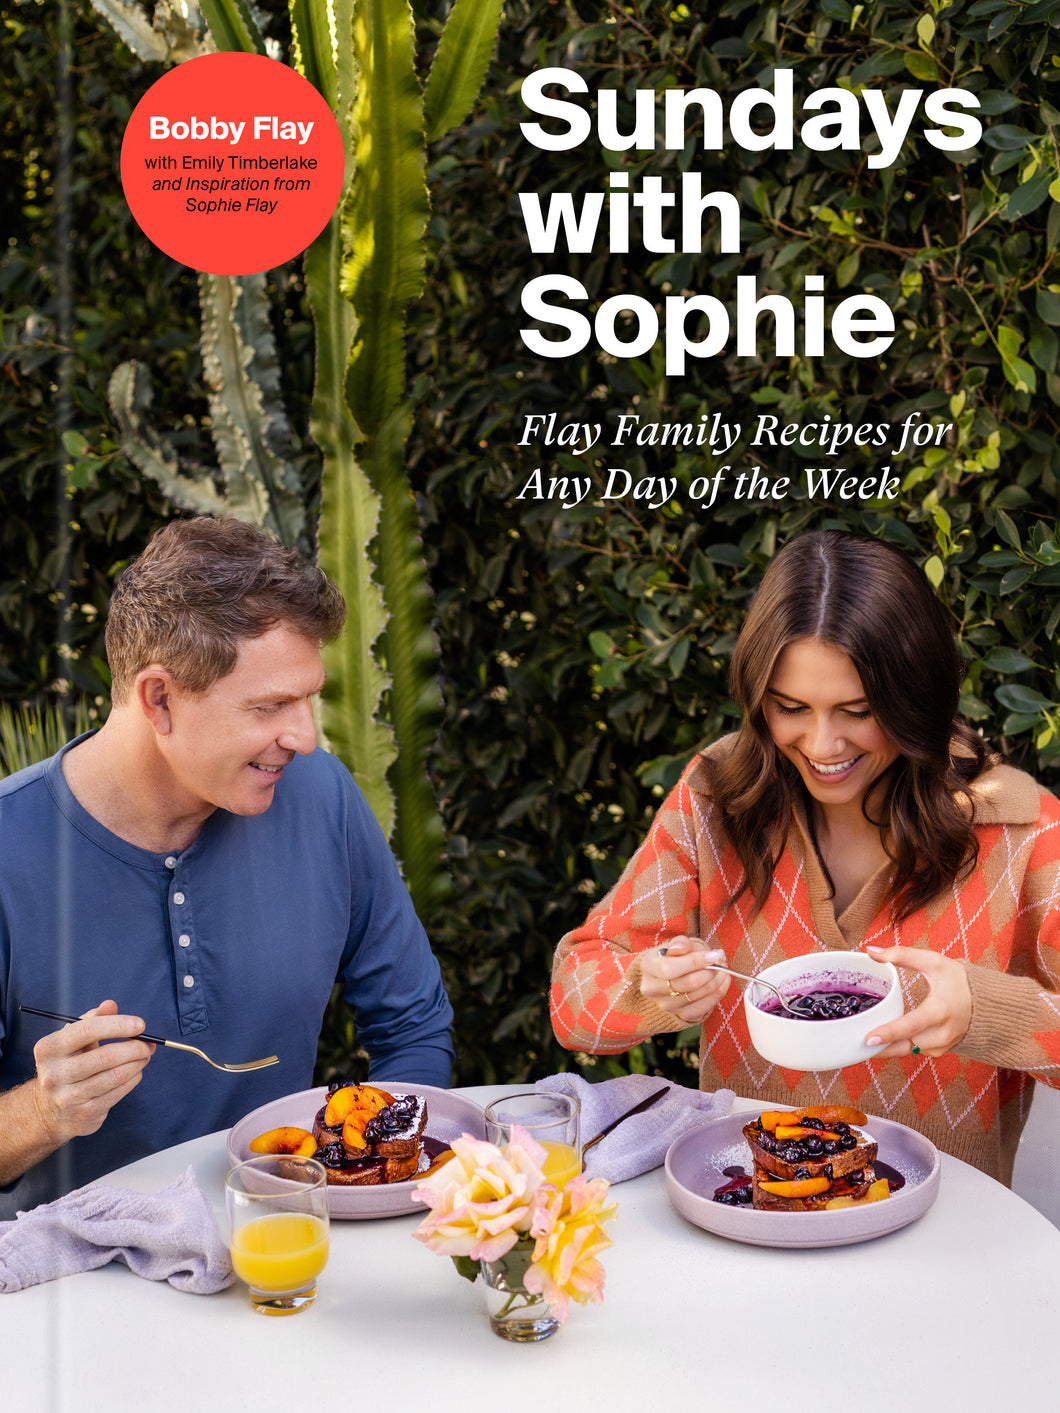 Sundays with Sophie : Flay Family Recipes for Any Day of the Week: A Bobby Flay Cookbook